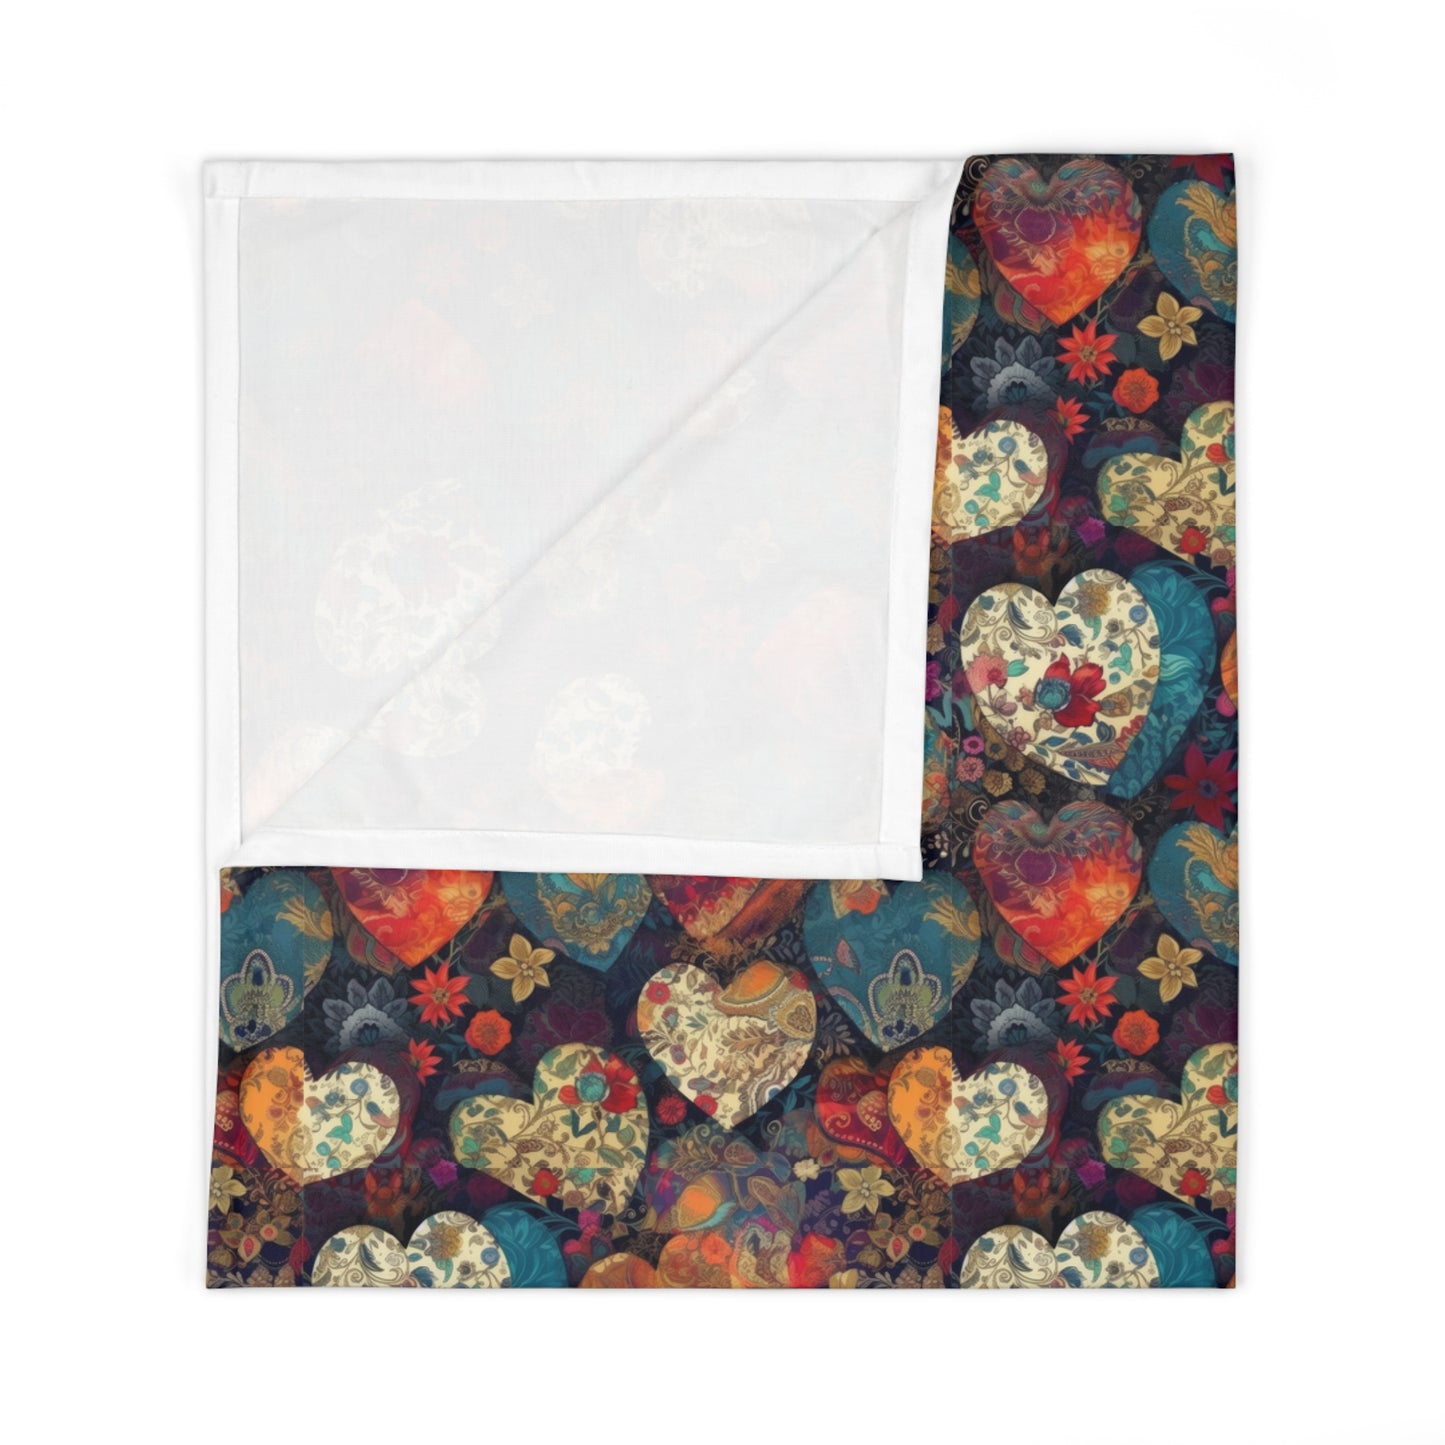 Fabric Hearts 1.4 - Baby Swaddle Blanket